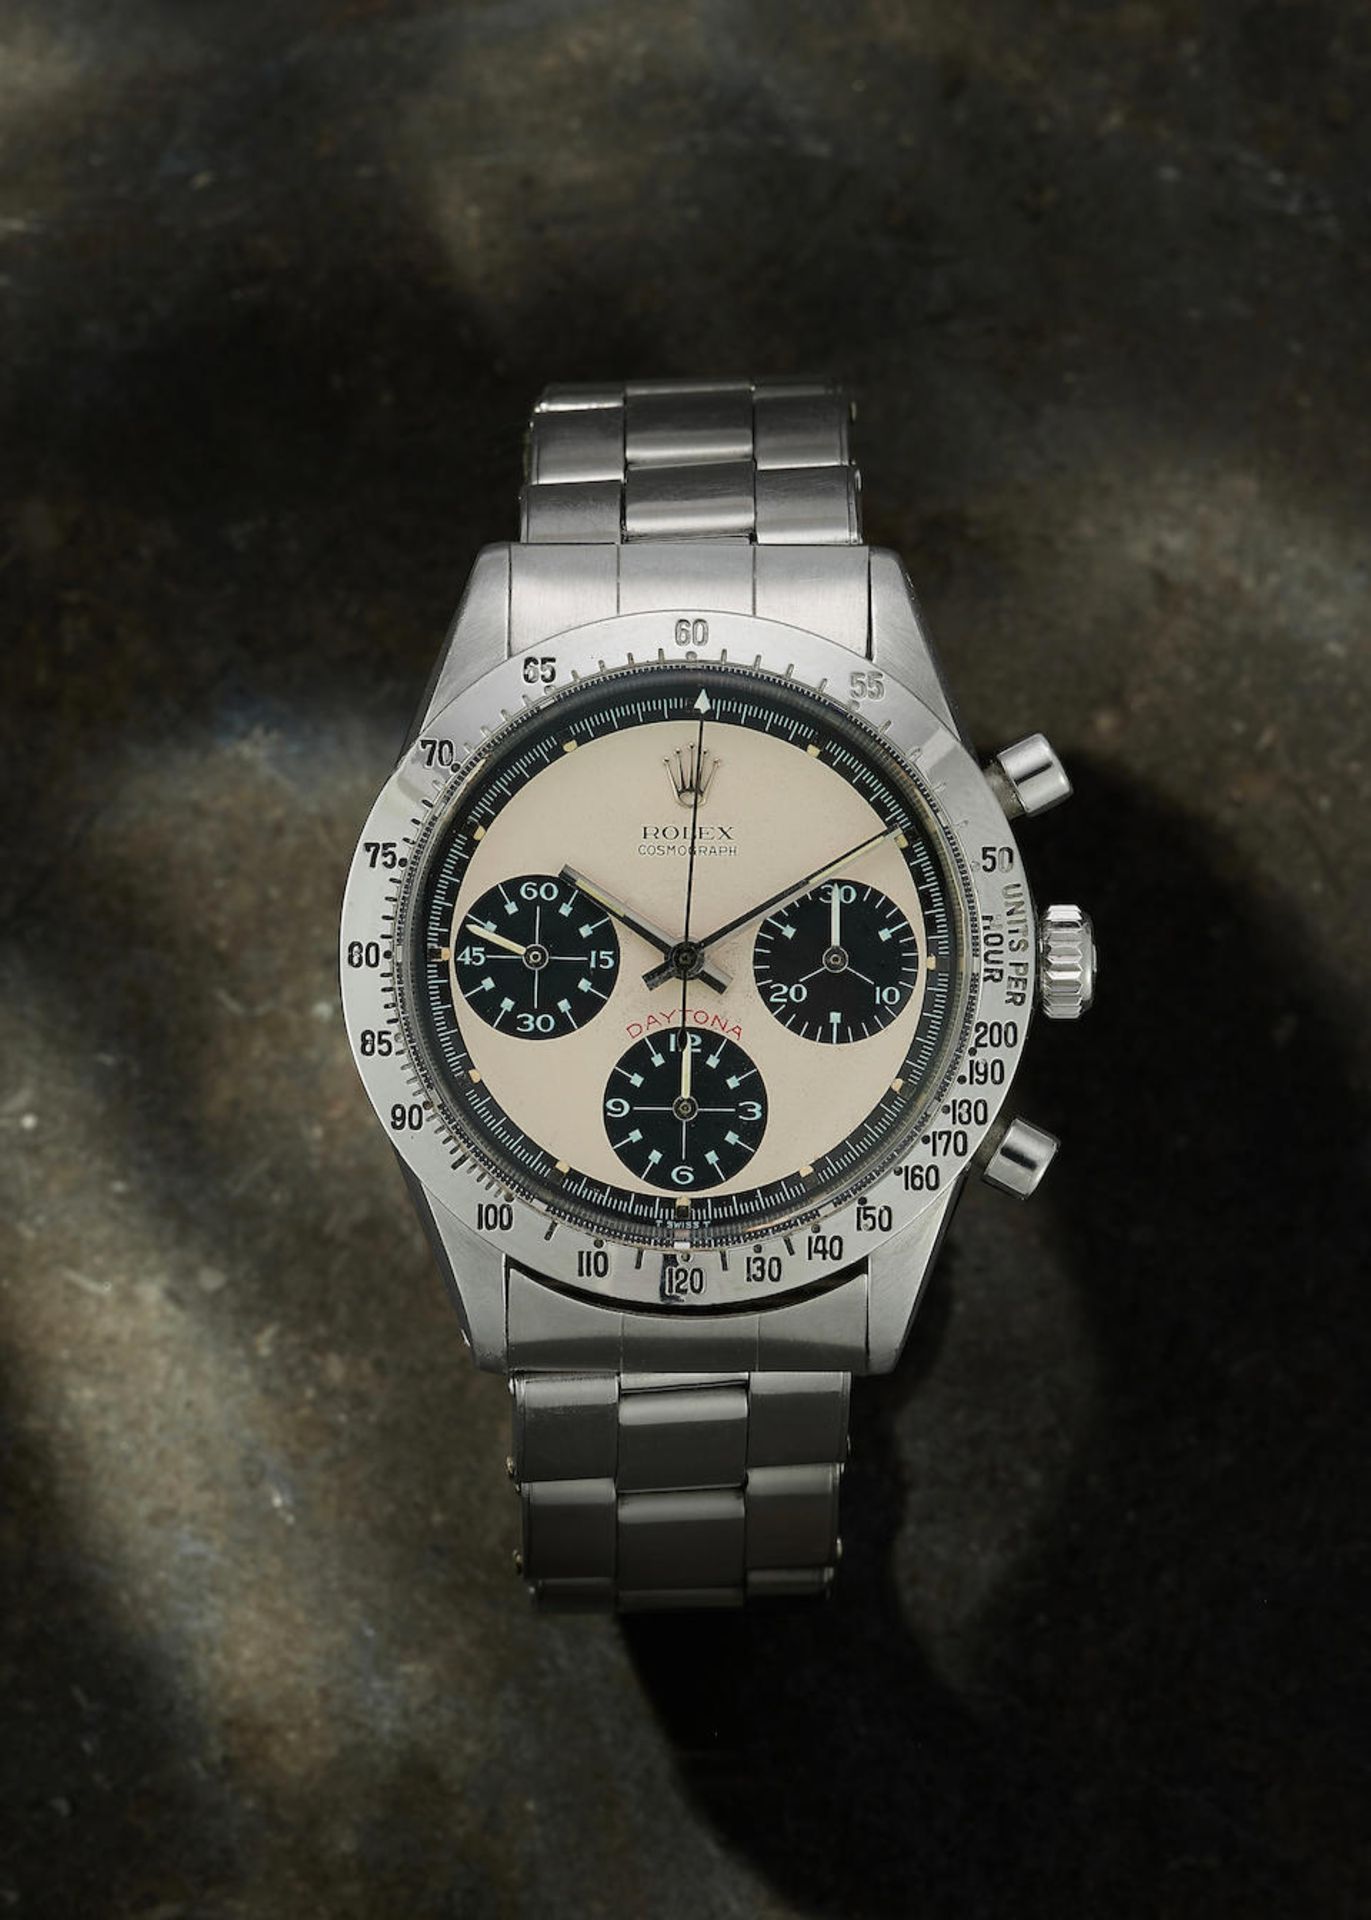 ROLEX. A VERY FINE AND RARE STAINLESS STEEL MANUAL WIND CHRONOGRAPH BRACELET WATCH Cosmograph Da...